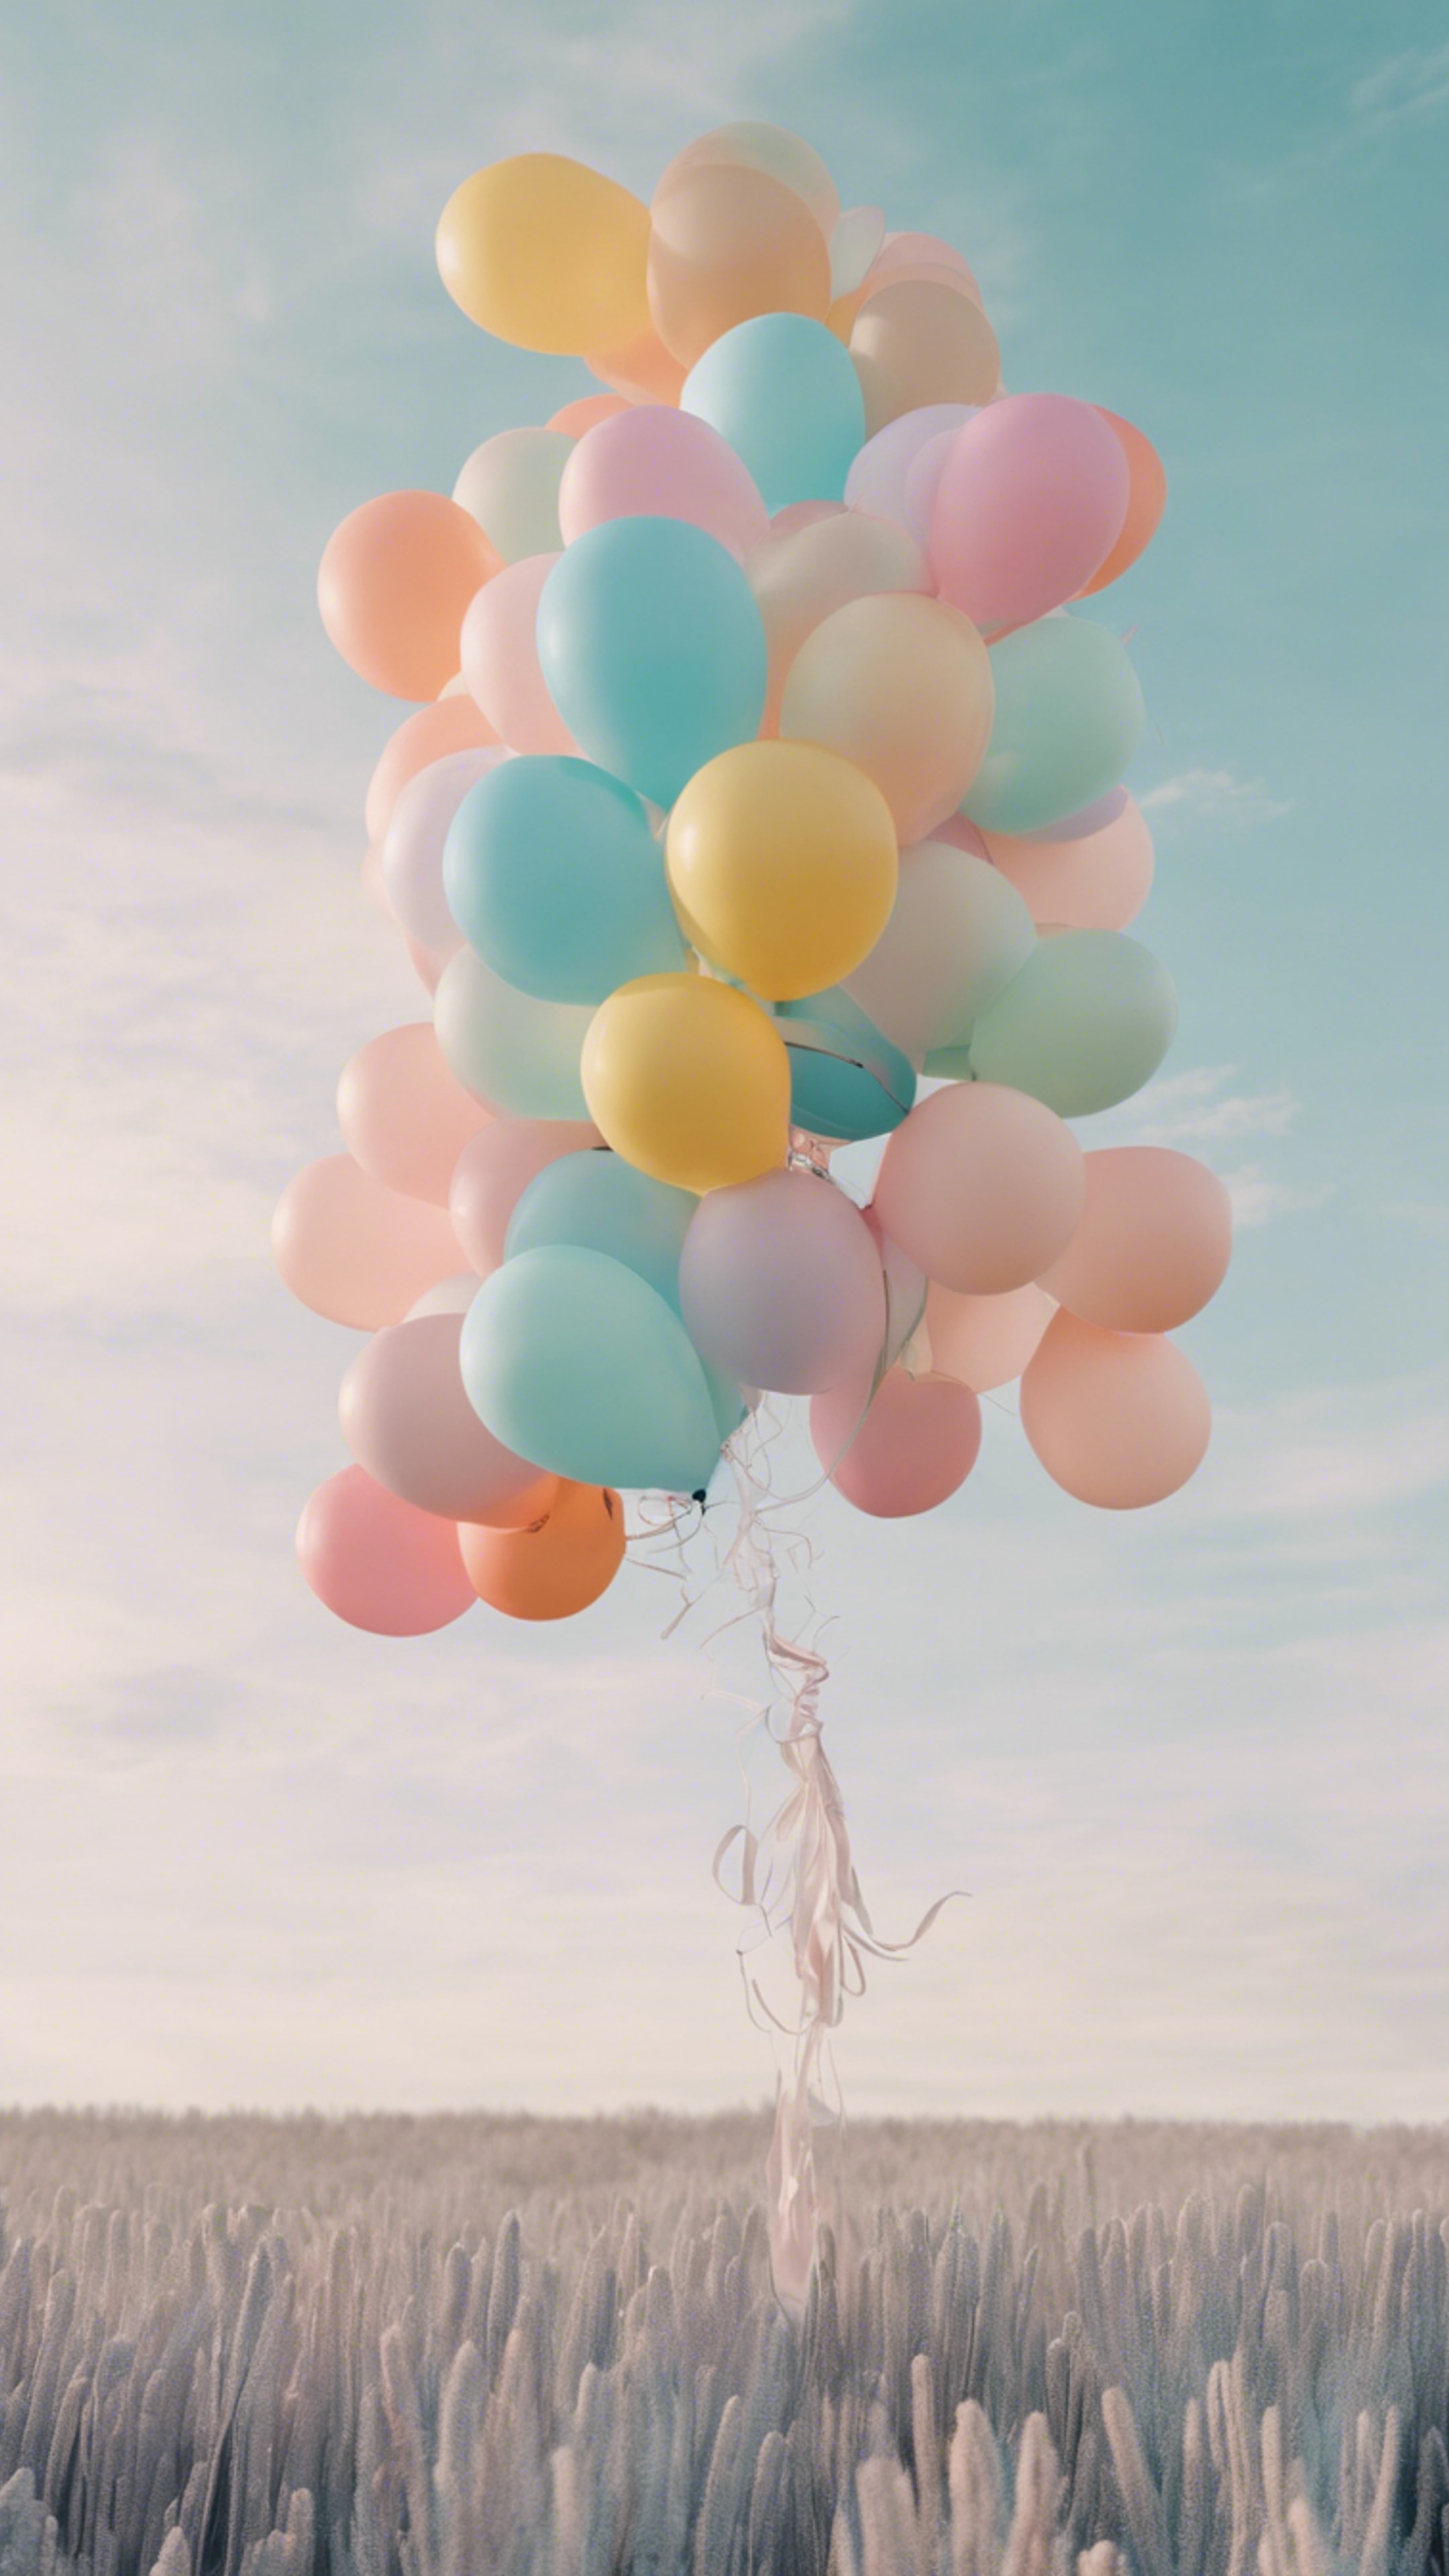 A cool pastel colored cluster of balloons floating in a clear sky. Валлпапер[294975c578db48368ab8]